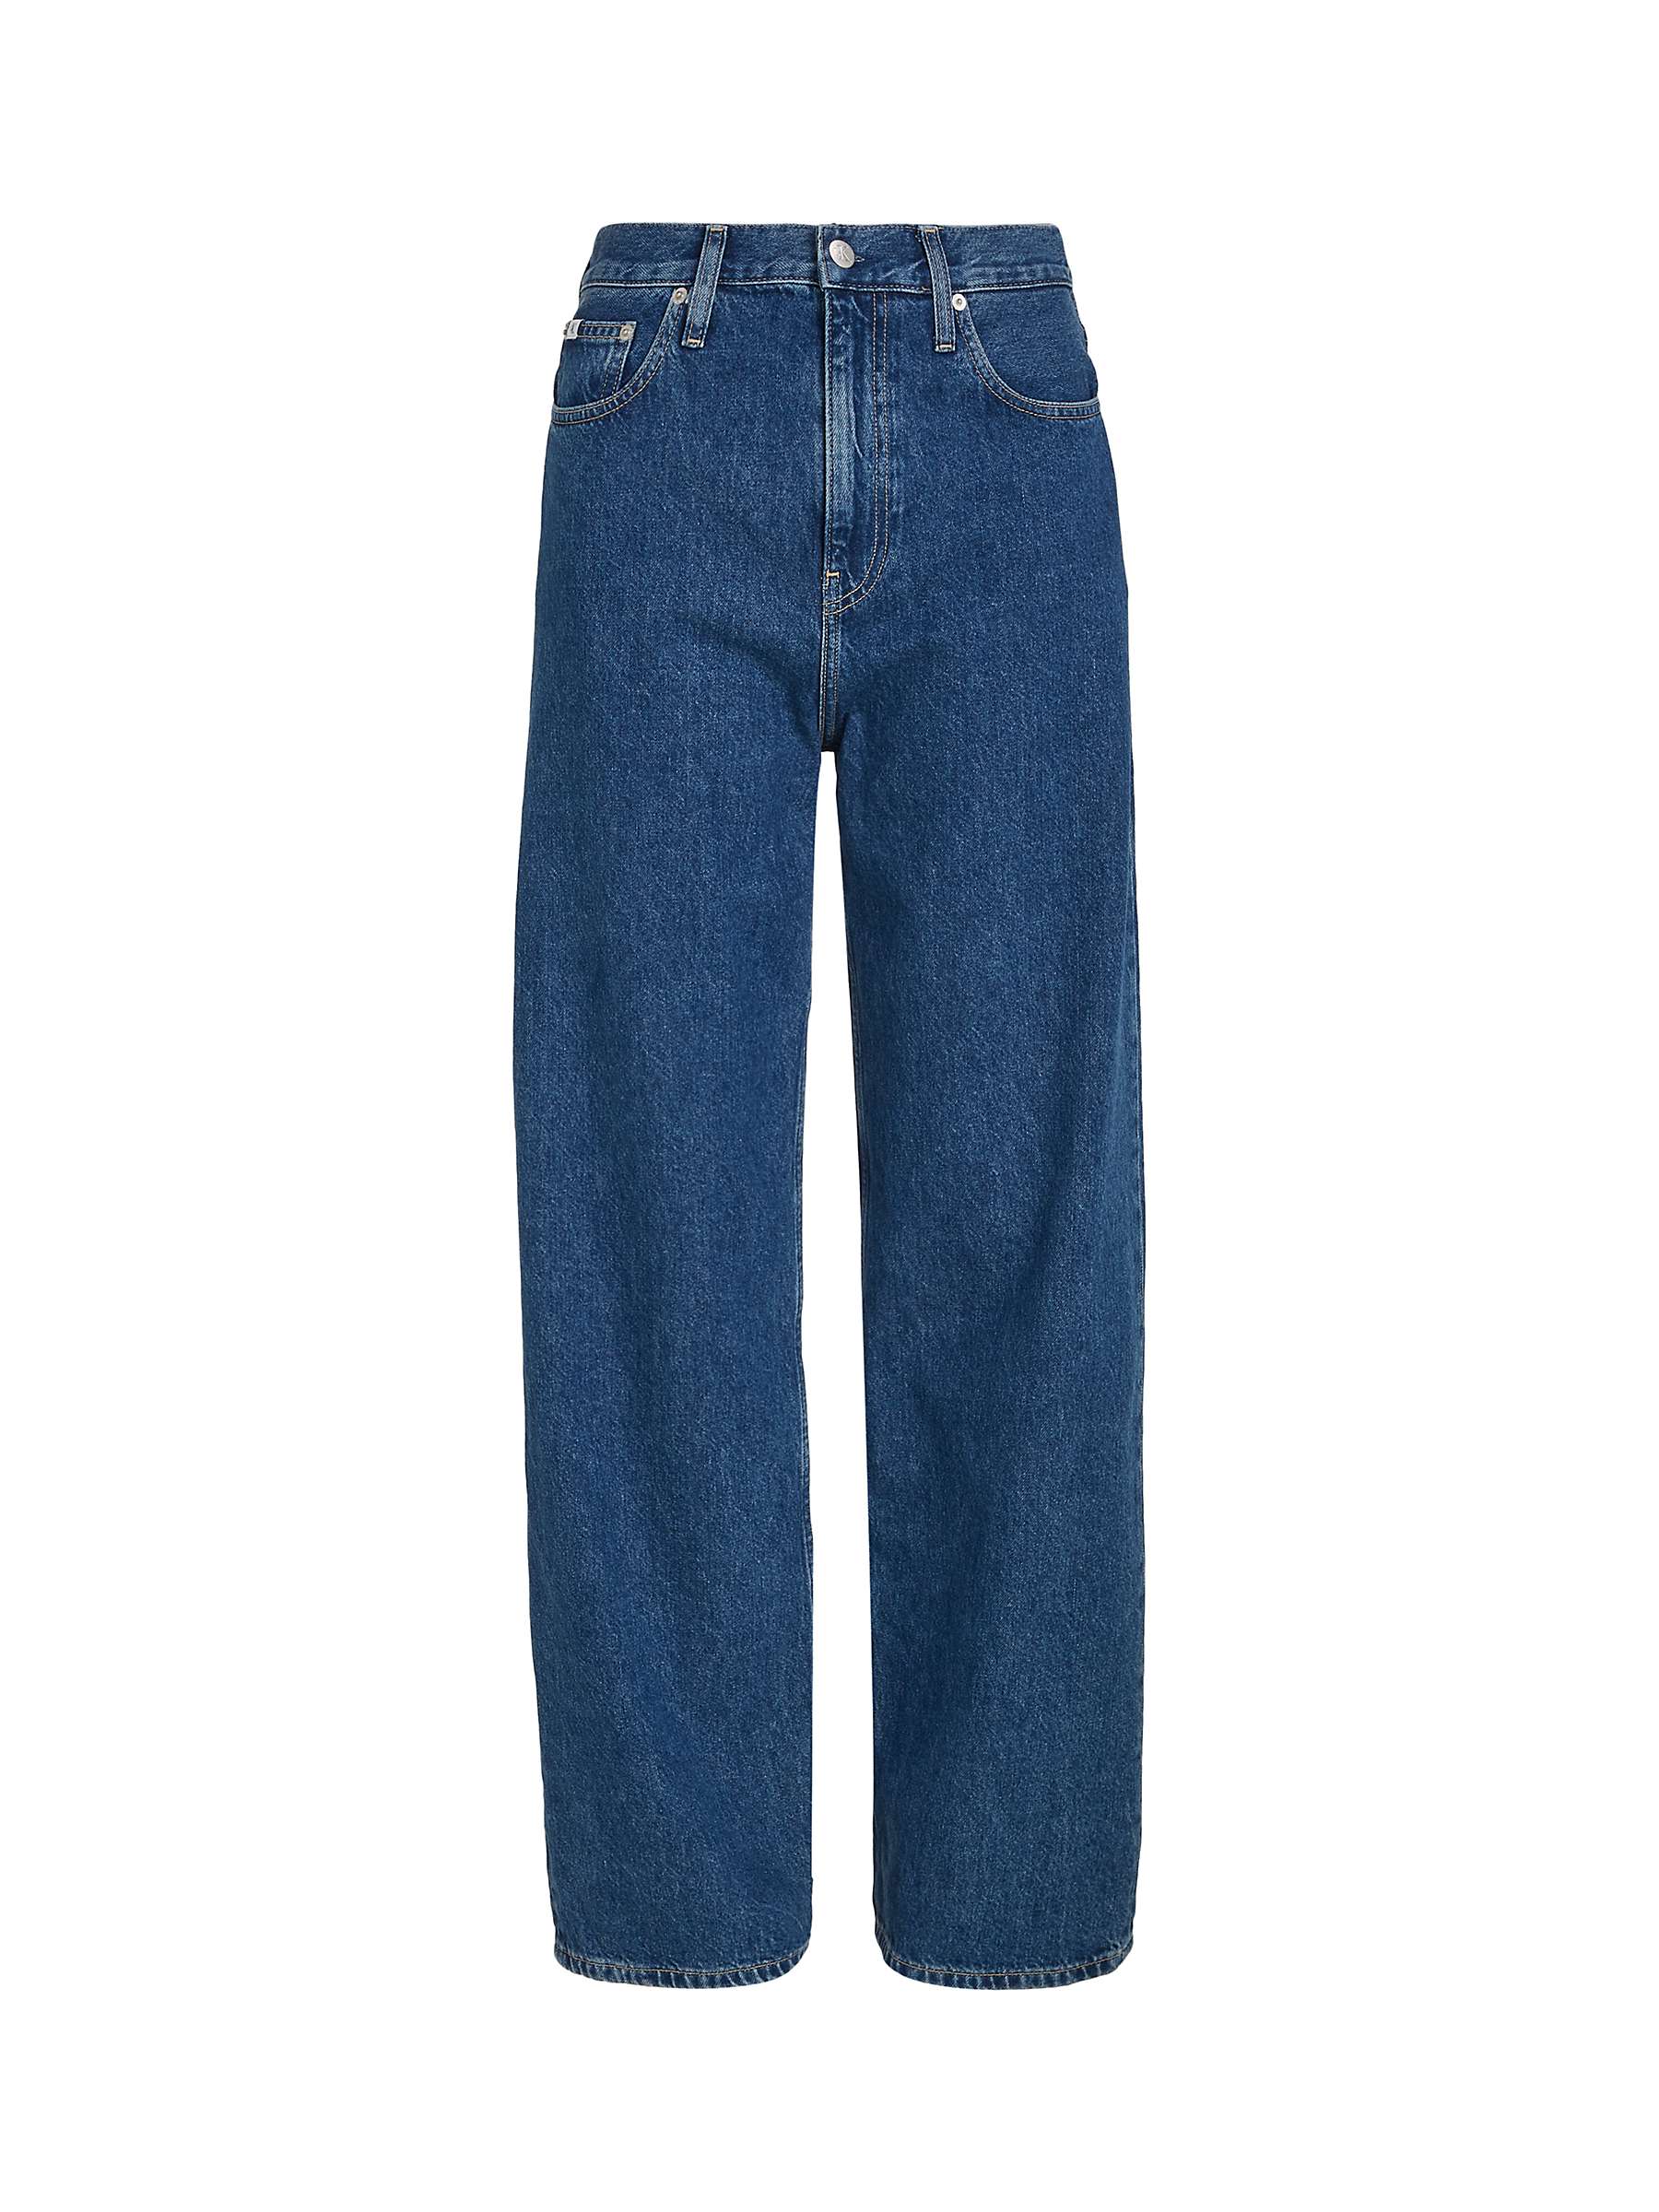 Buy Calvin Klein High Rise Relaxed Fit Jeans, Mid Blue Online at johnlewis.com